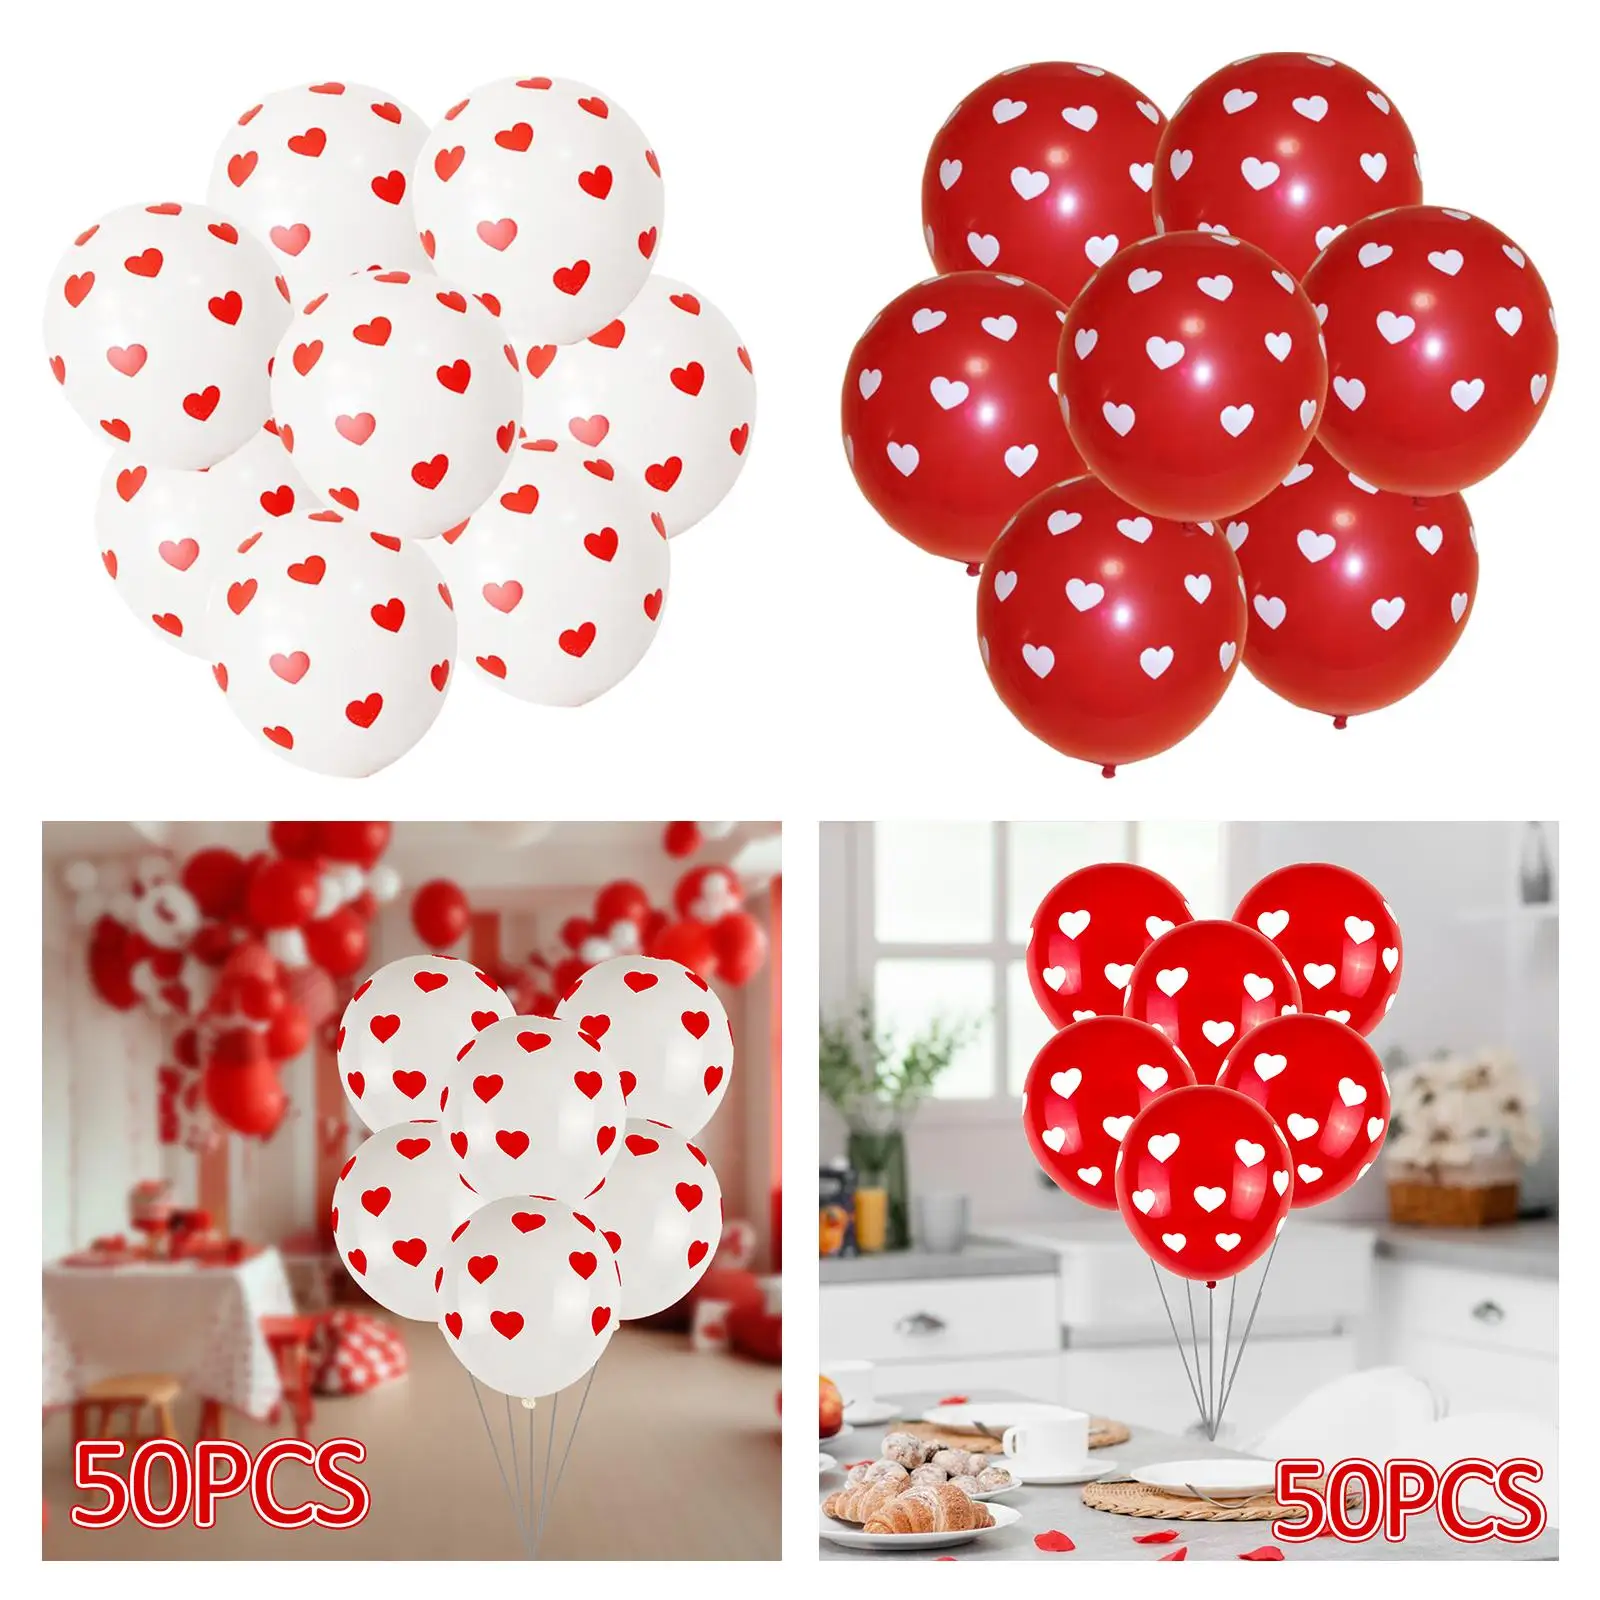 50Pcs Valentine`s Day Balloons Photo Props DIY Heart Balloons for Holiday Celebrations Engagement Anniversary Valentines Day